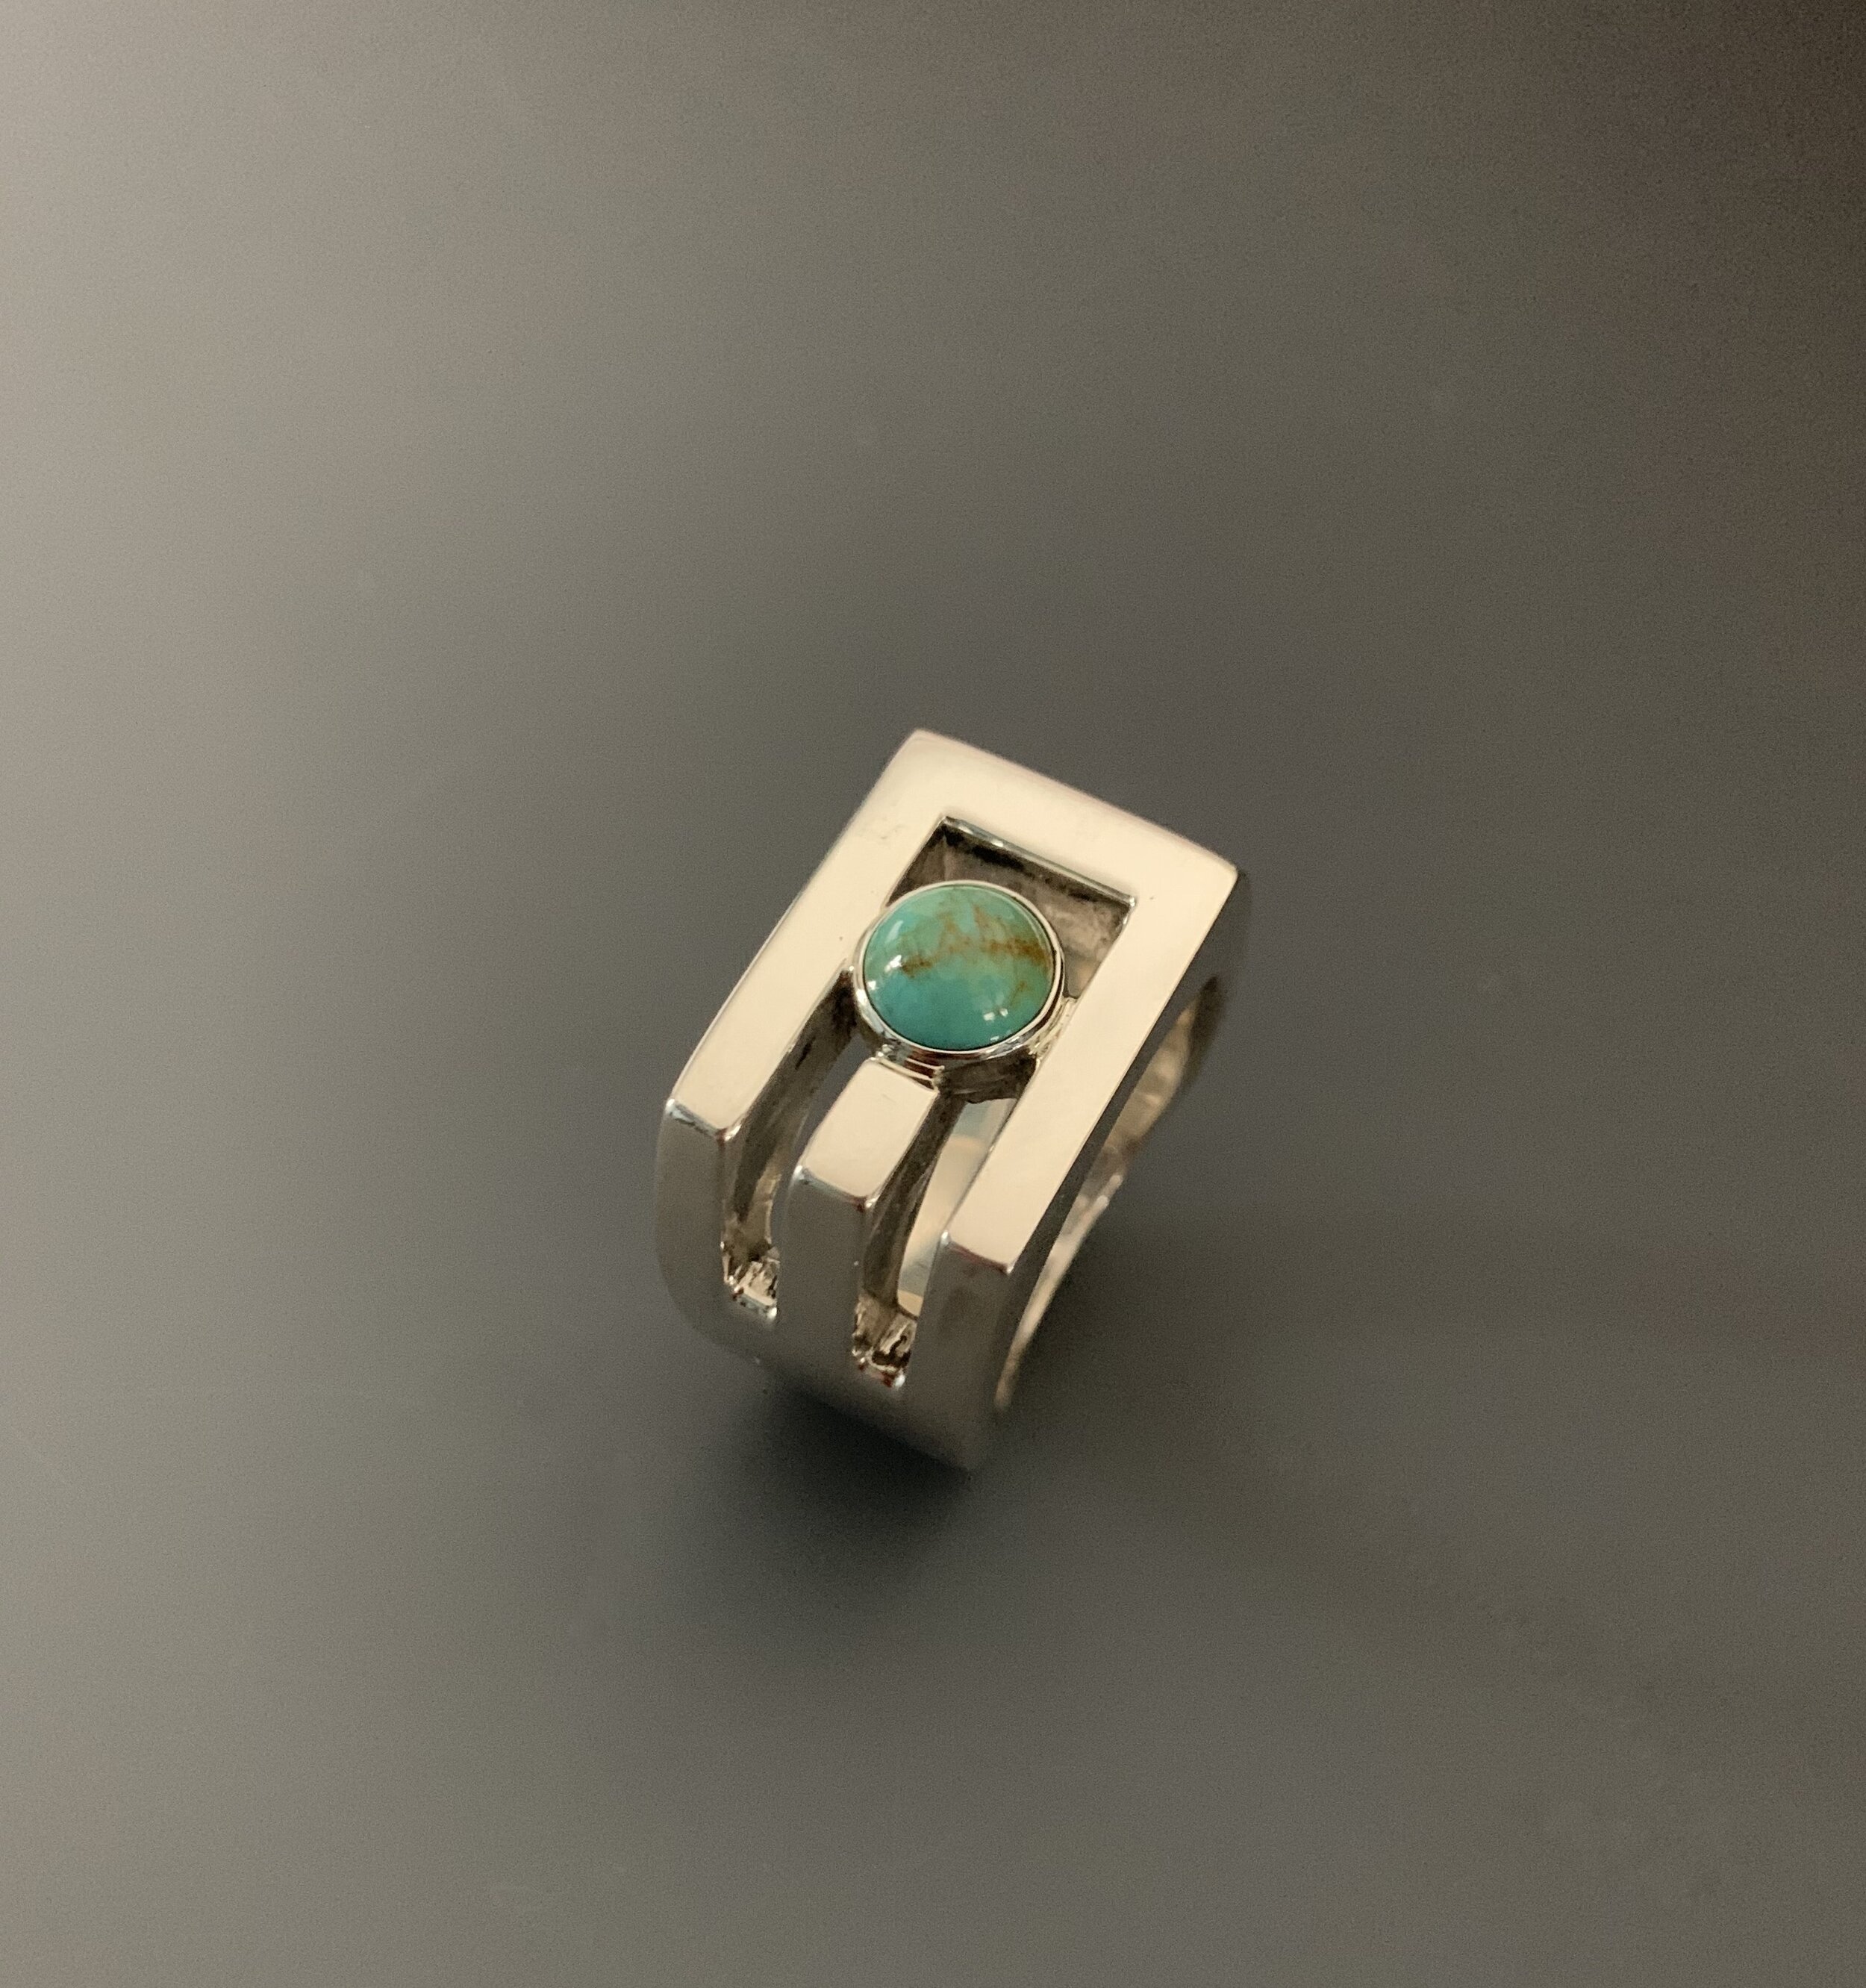 Turquoise tribute ring